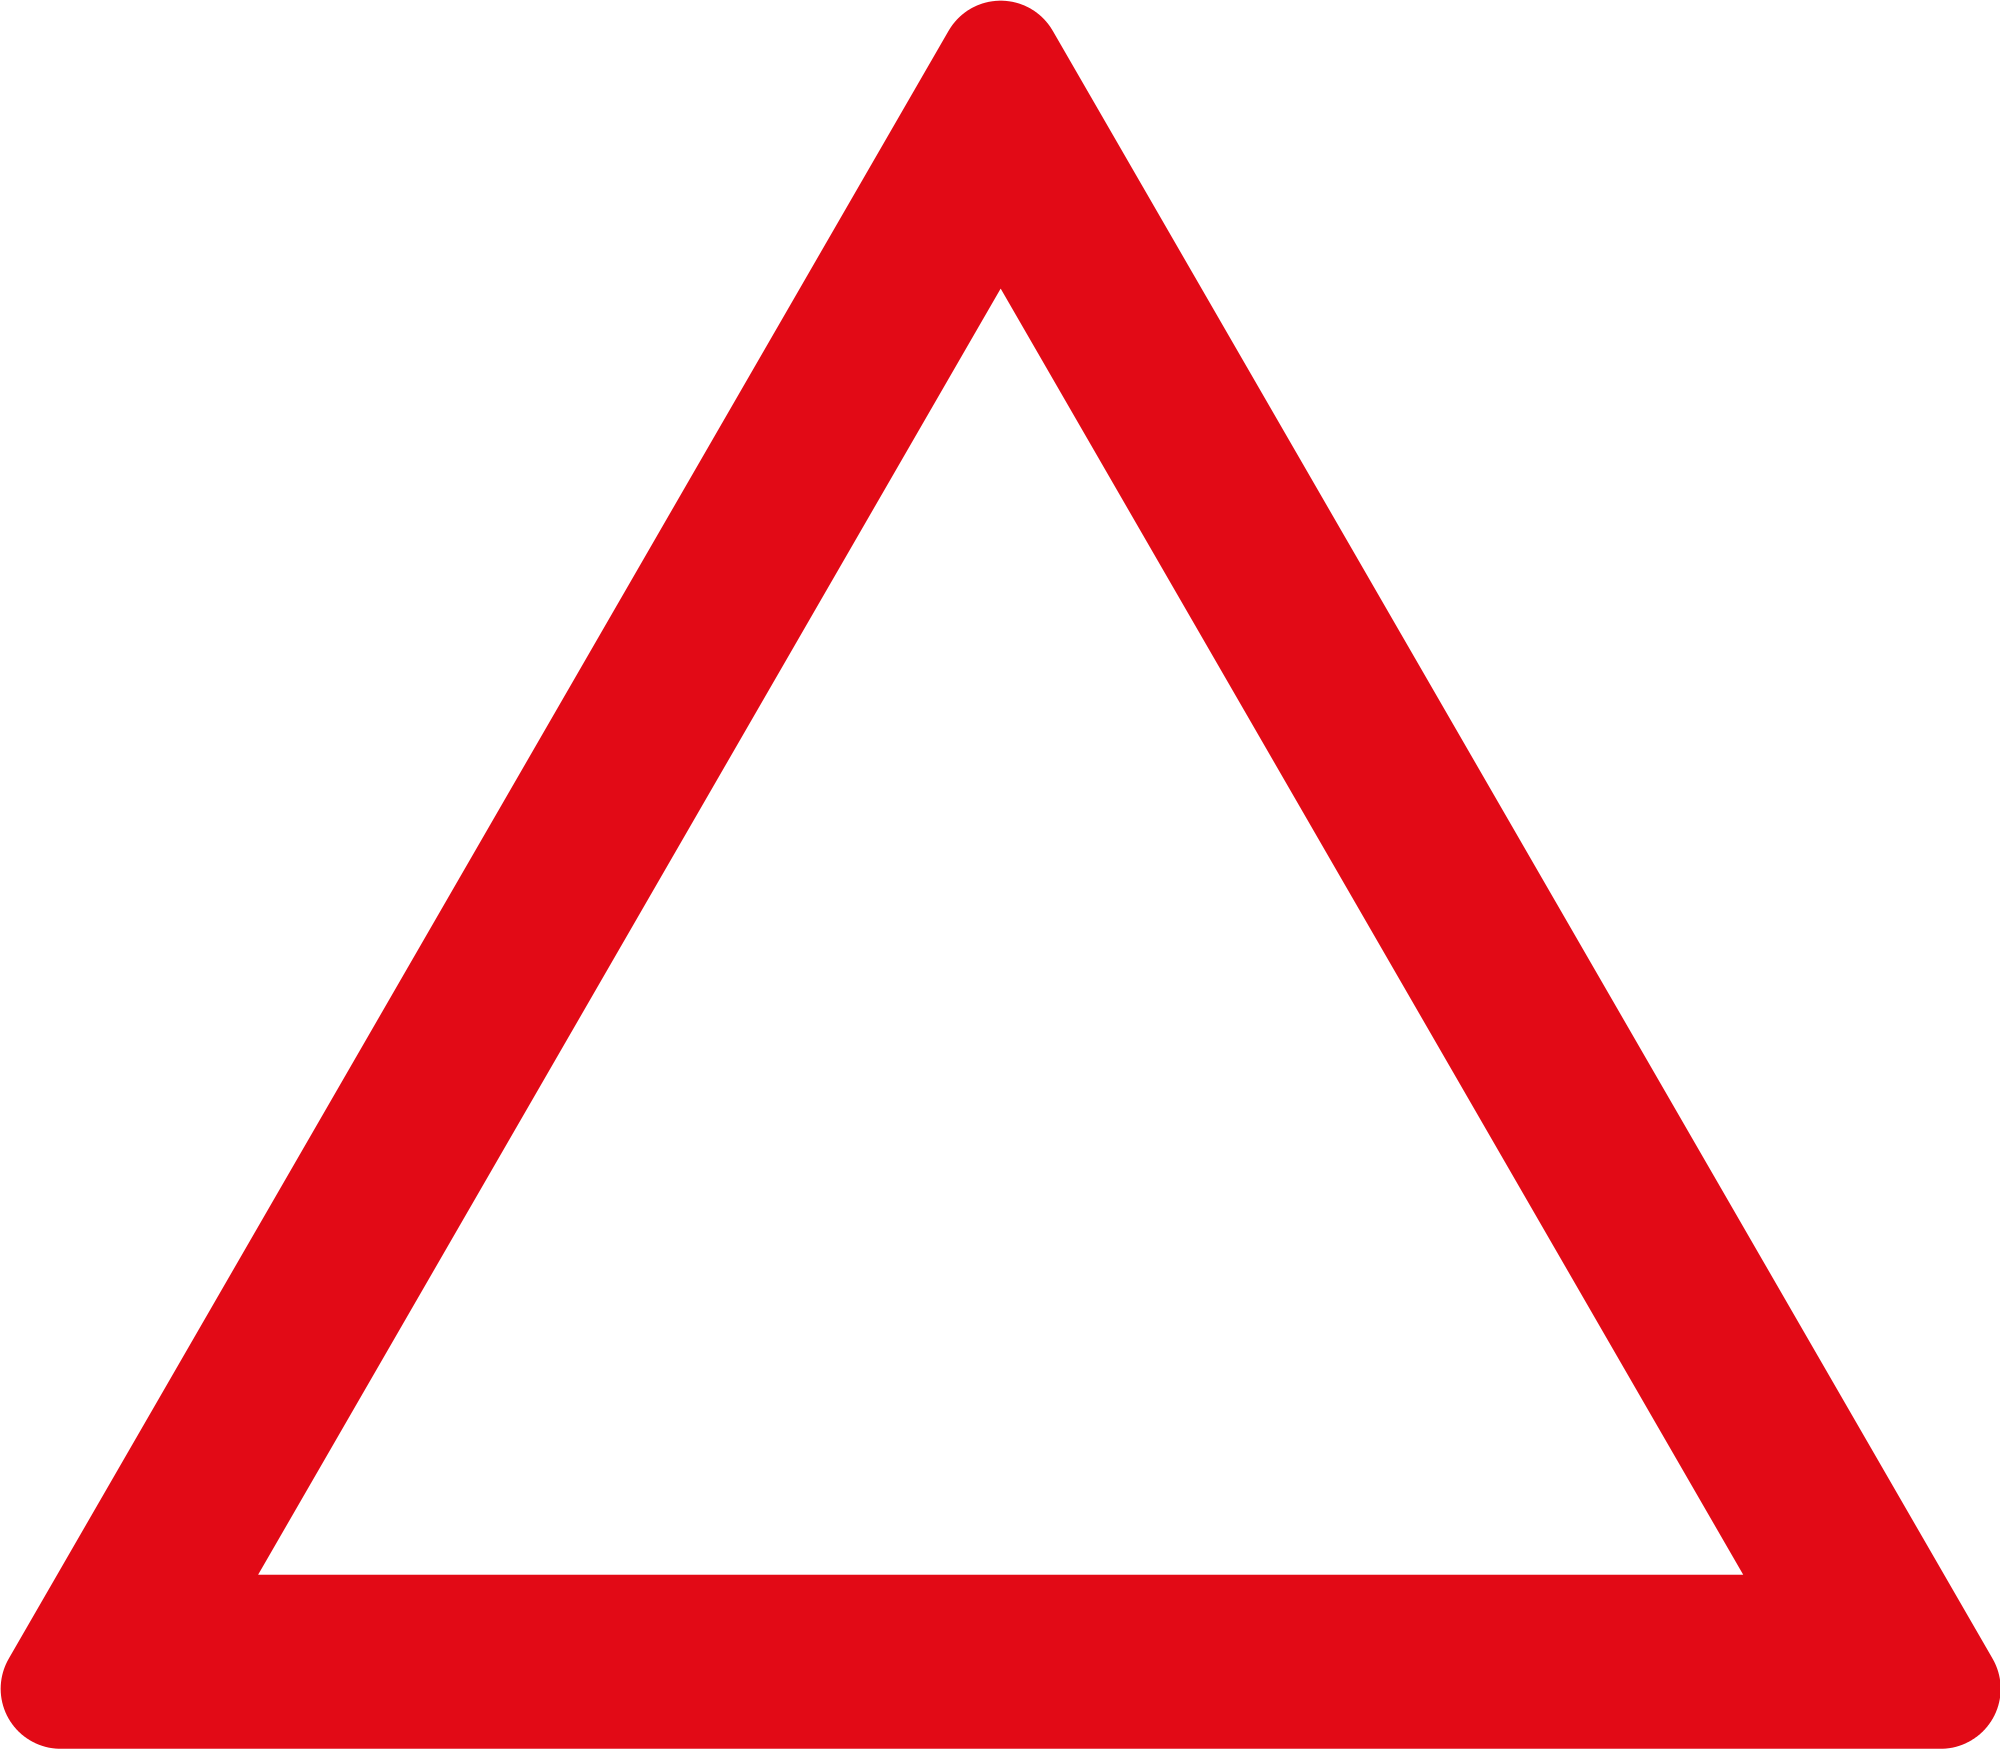 File:Triangle warning sign (red and white).svg